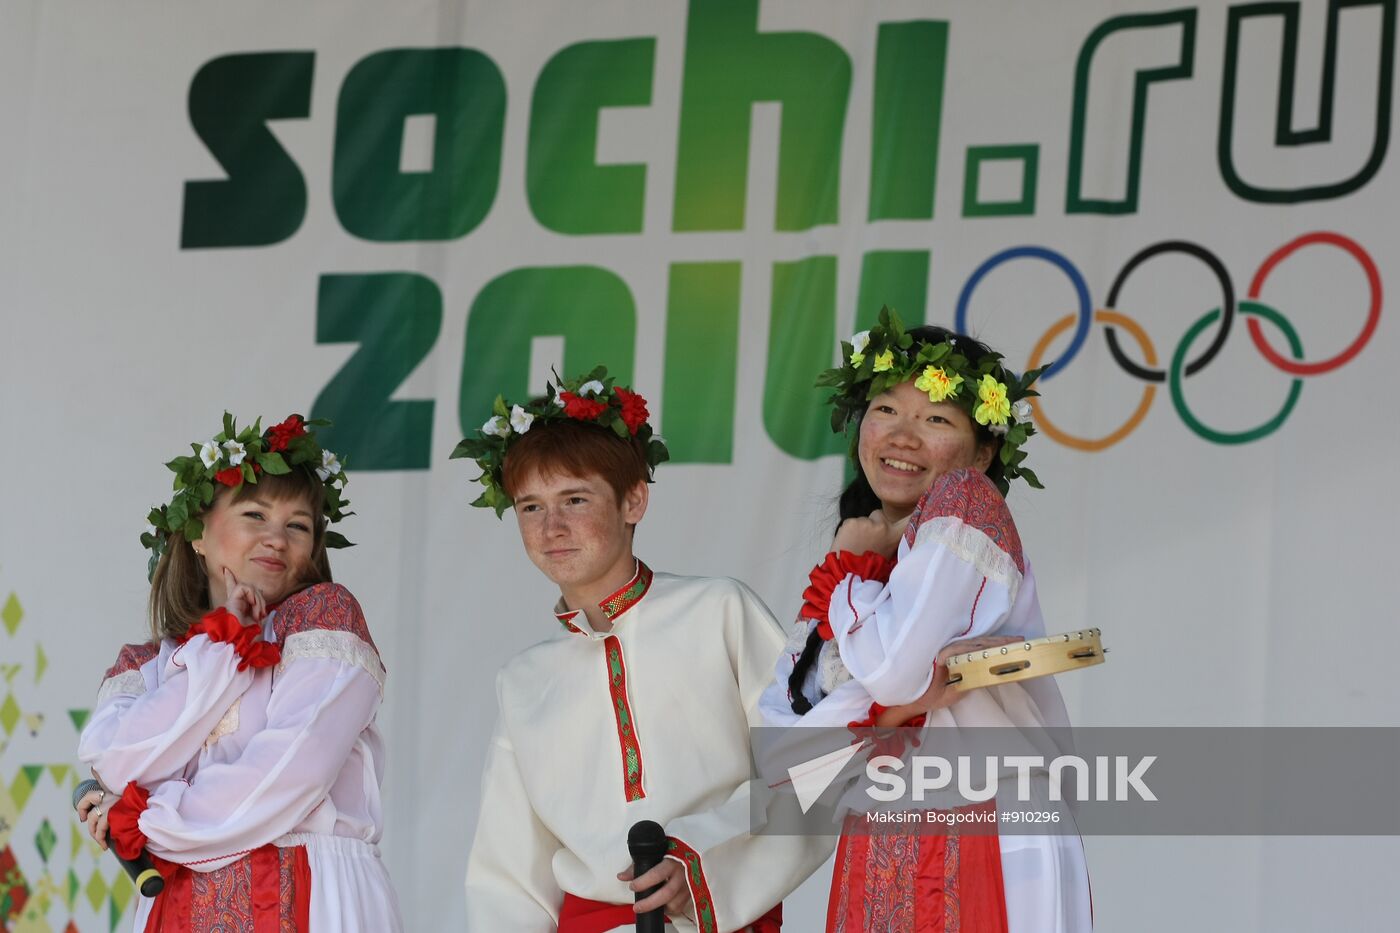 2014 Olympics: 1,000 Days To Go event held in Kazan